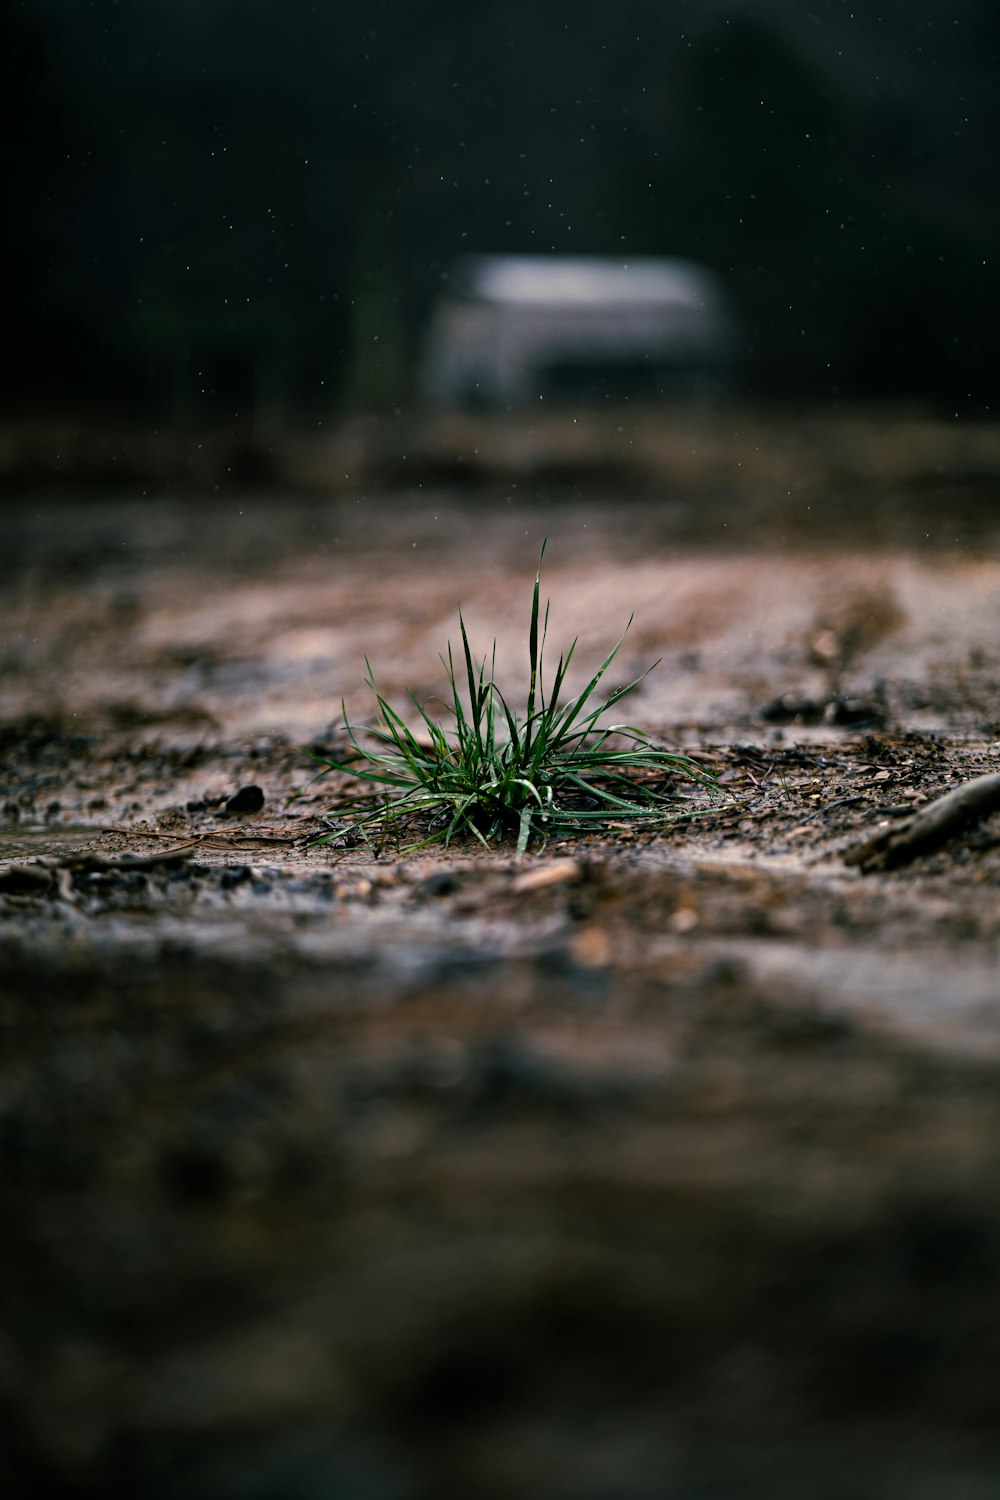 a small green plant growing in the dirt